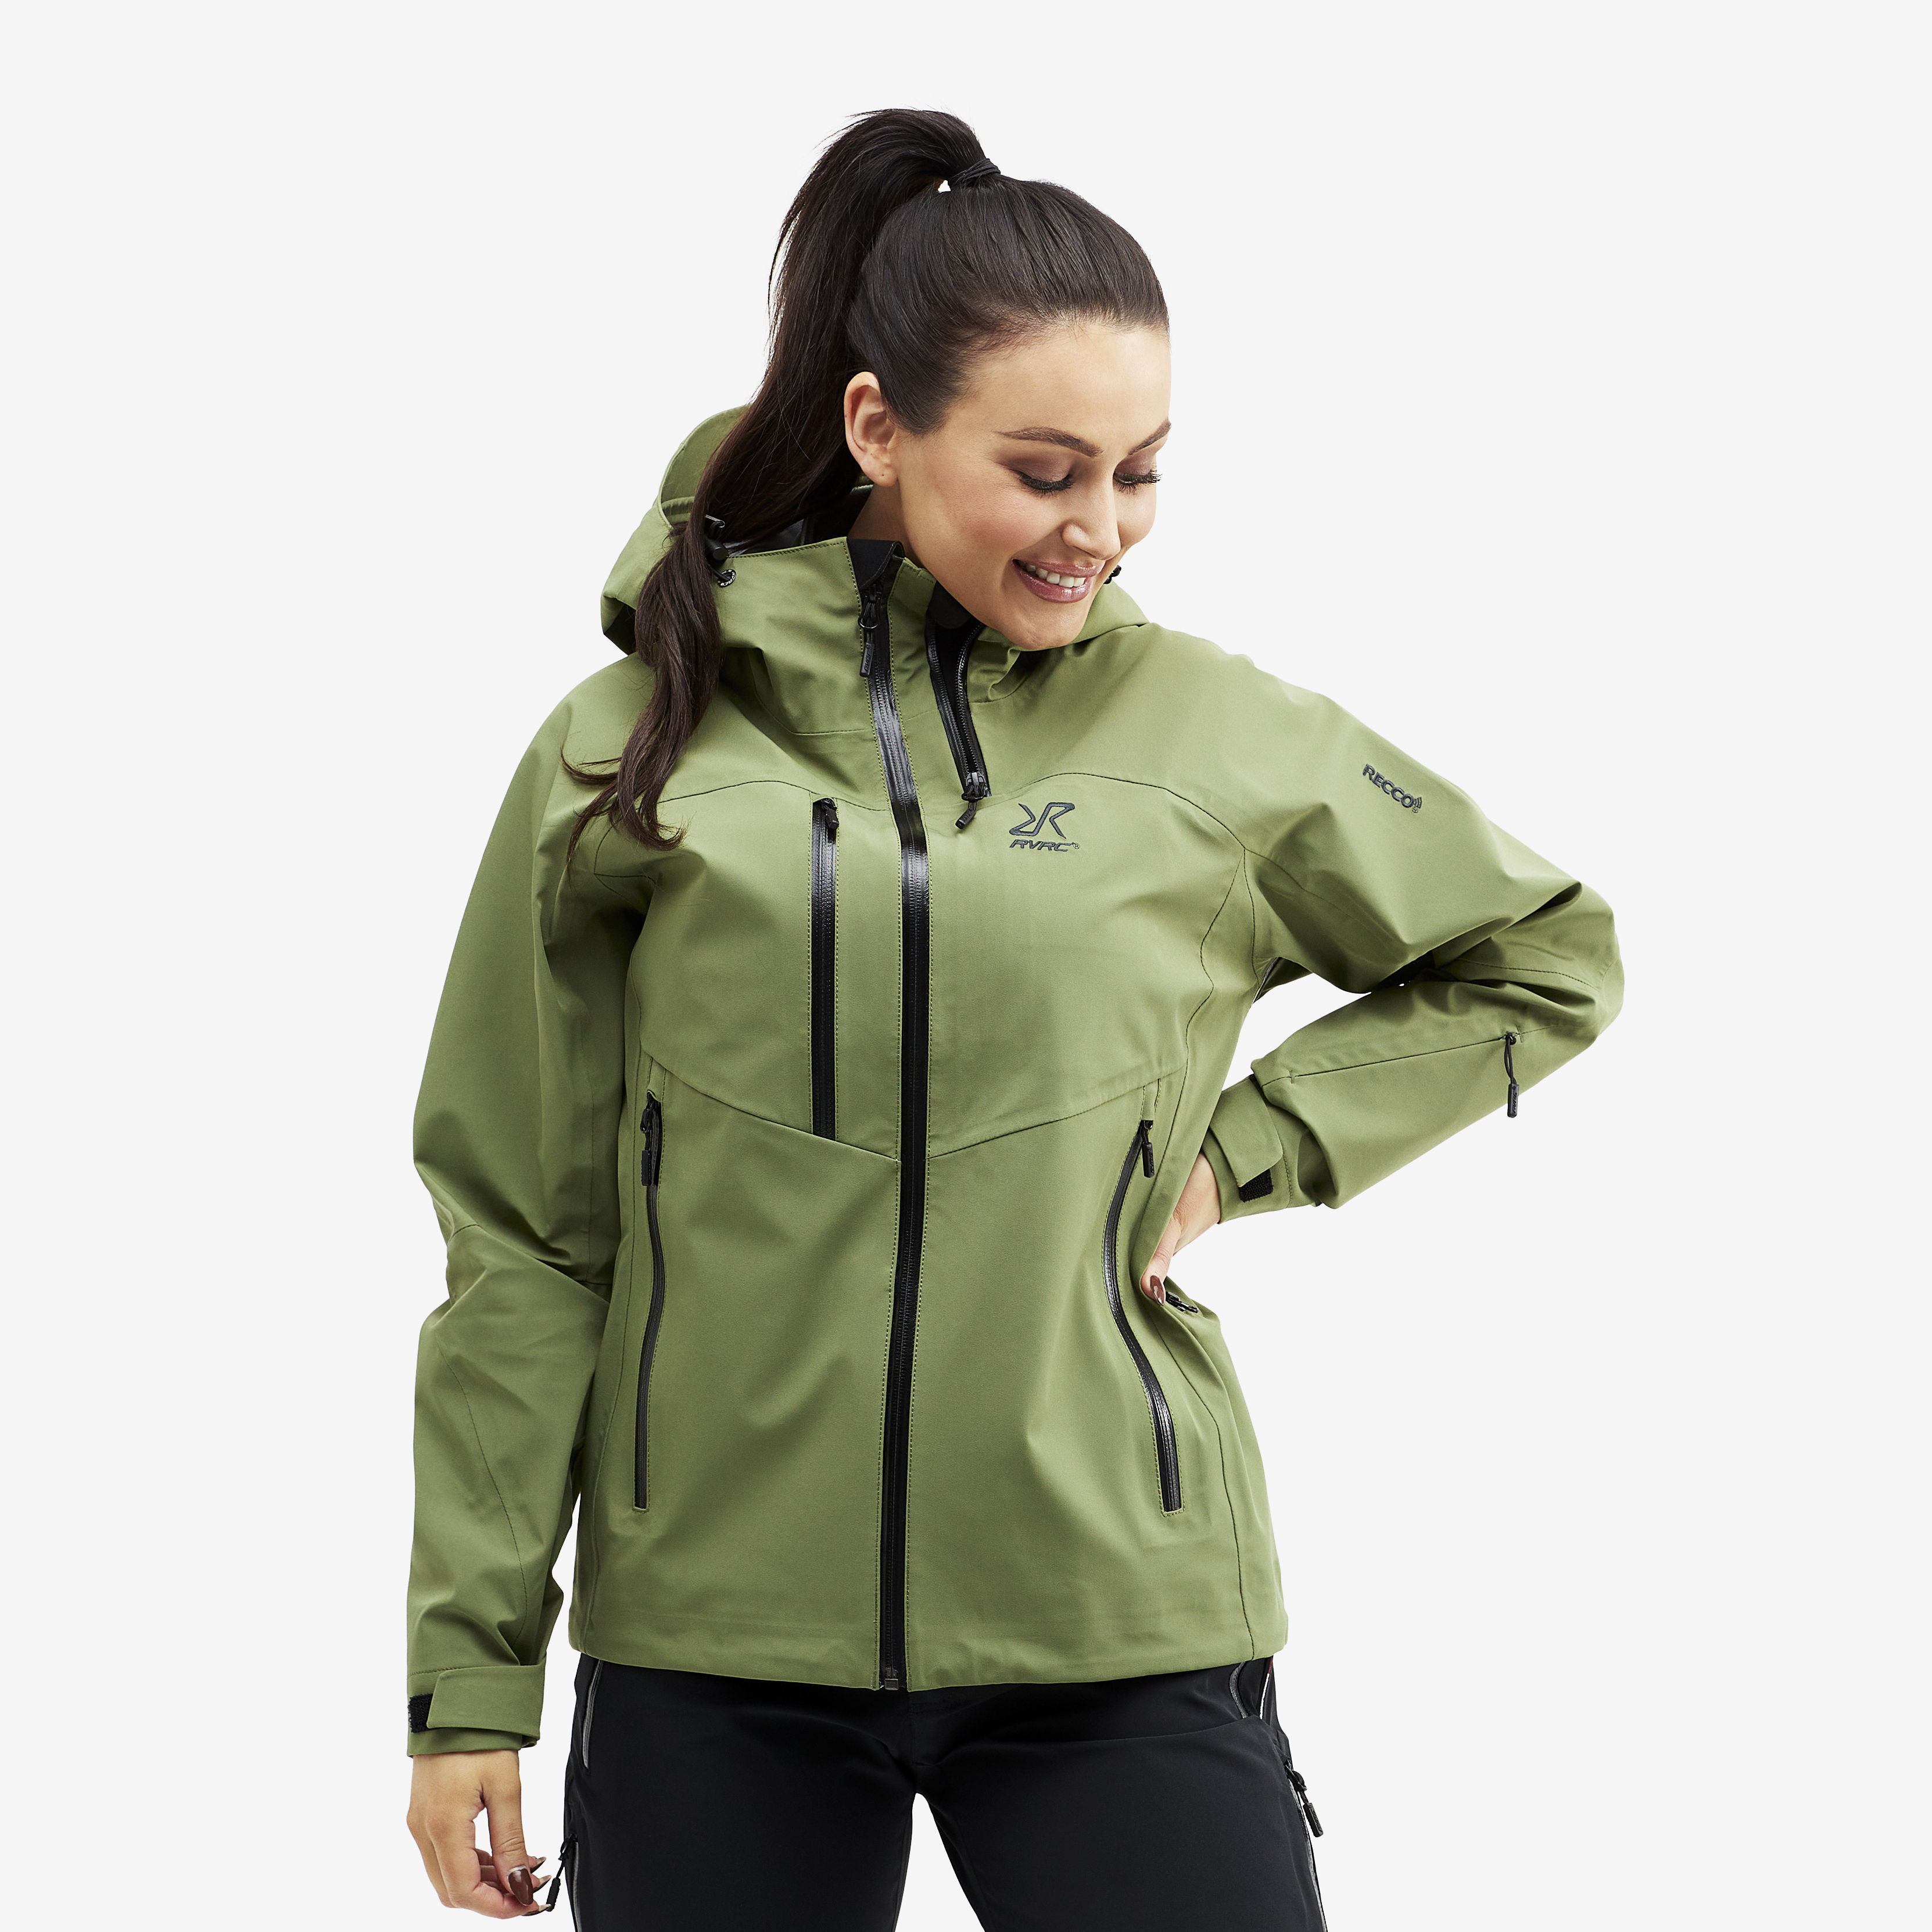 Cyclone Rescue Jacket 2.0 Pine Green Naiset